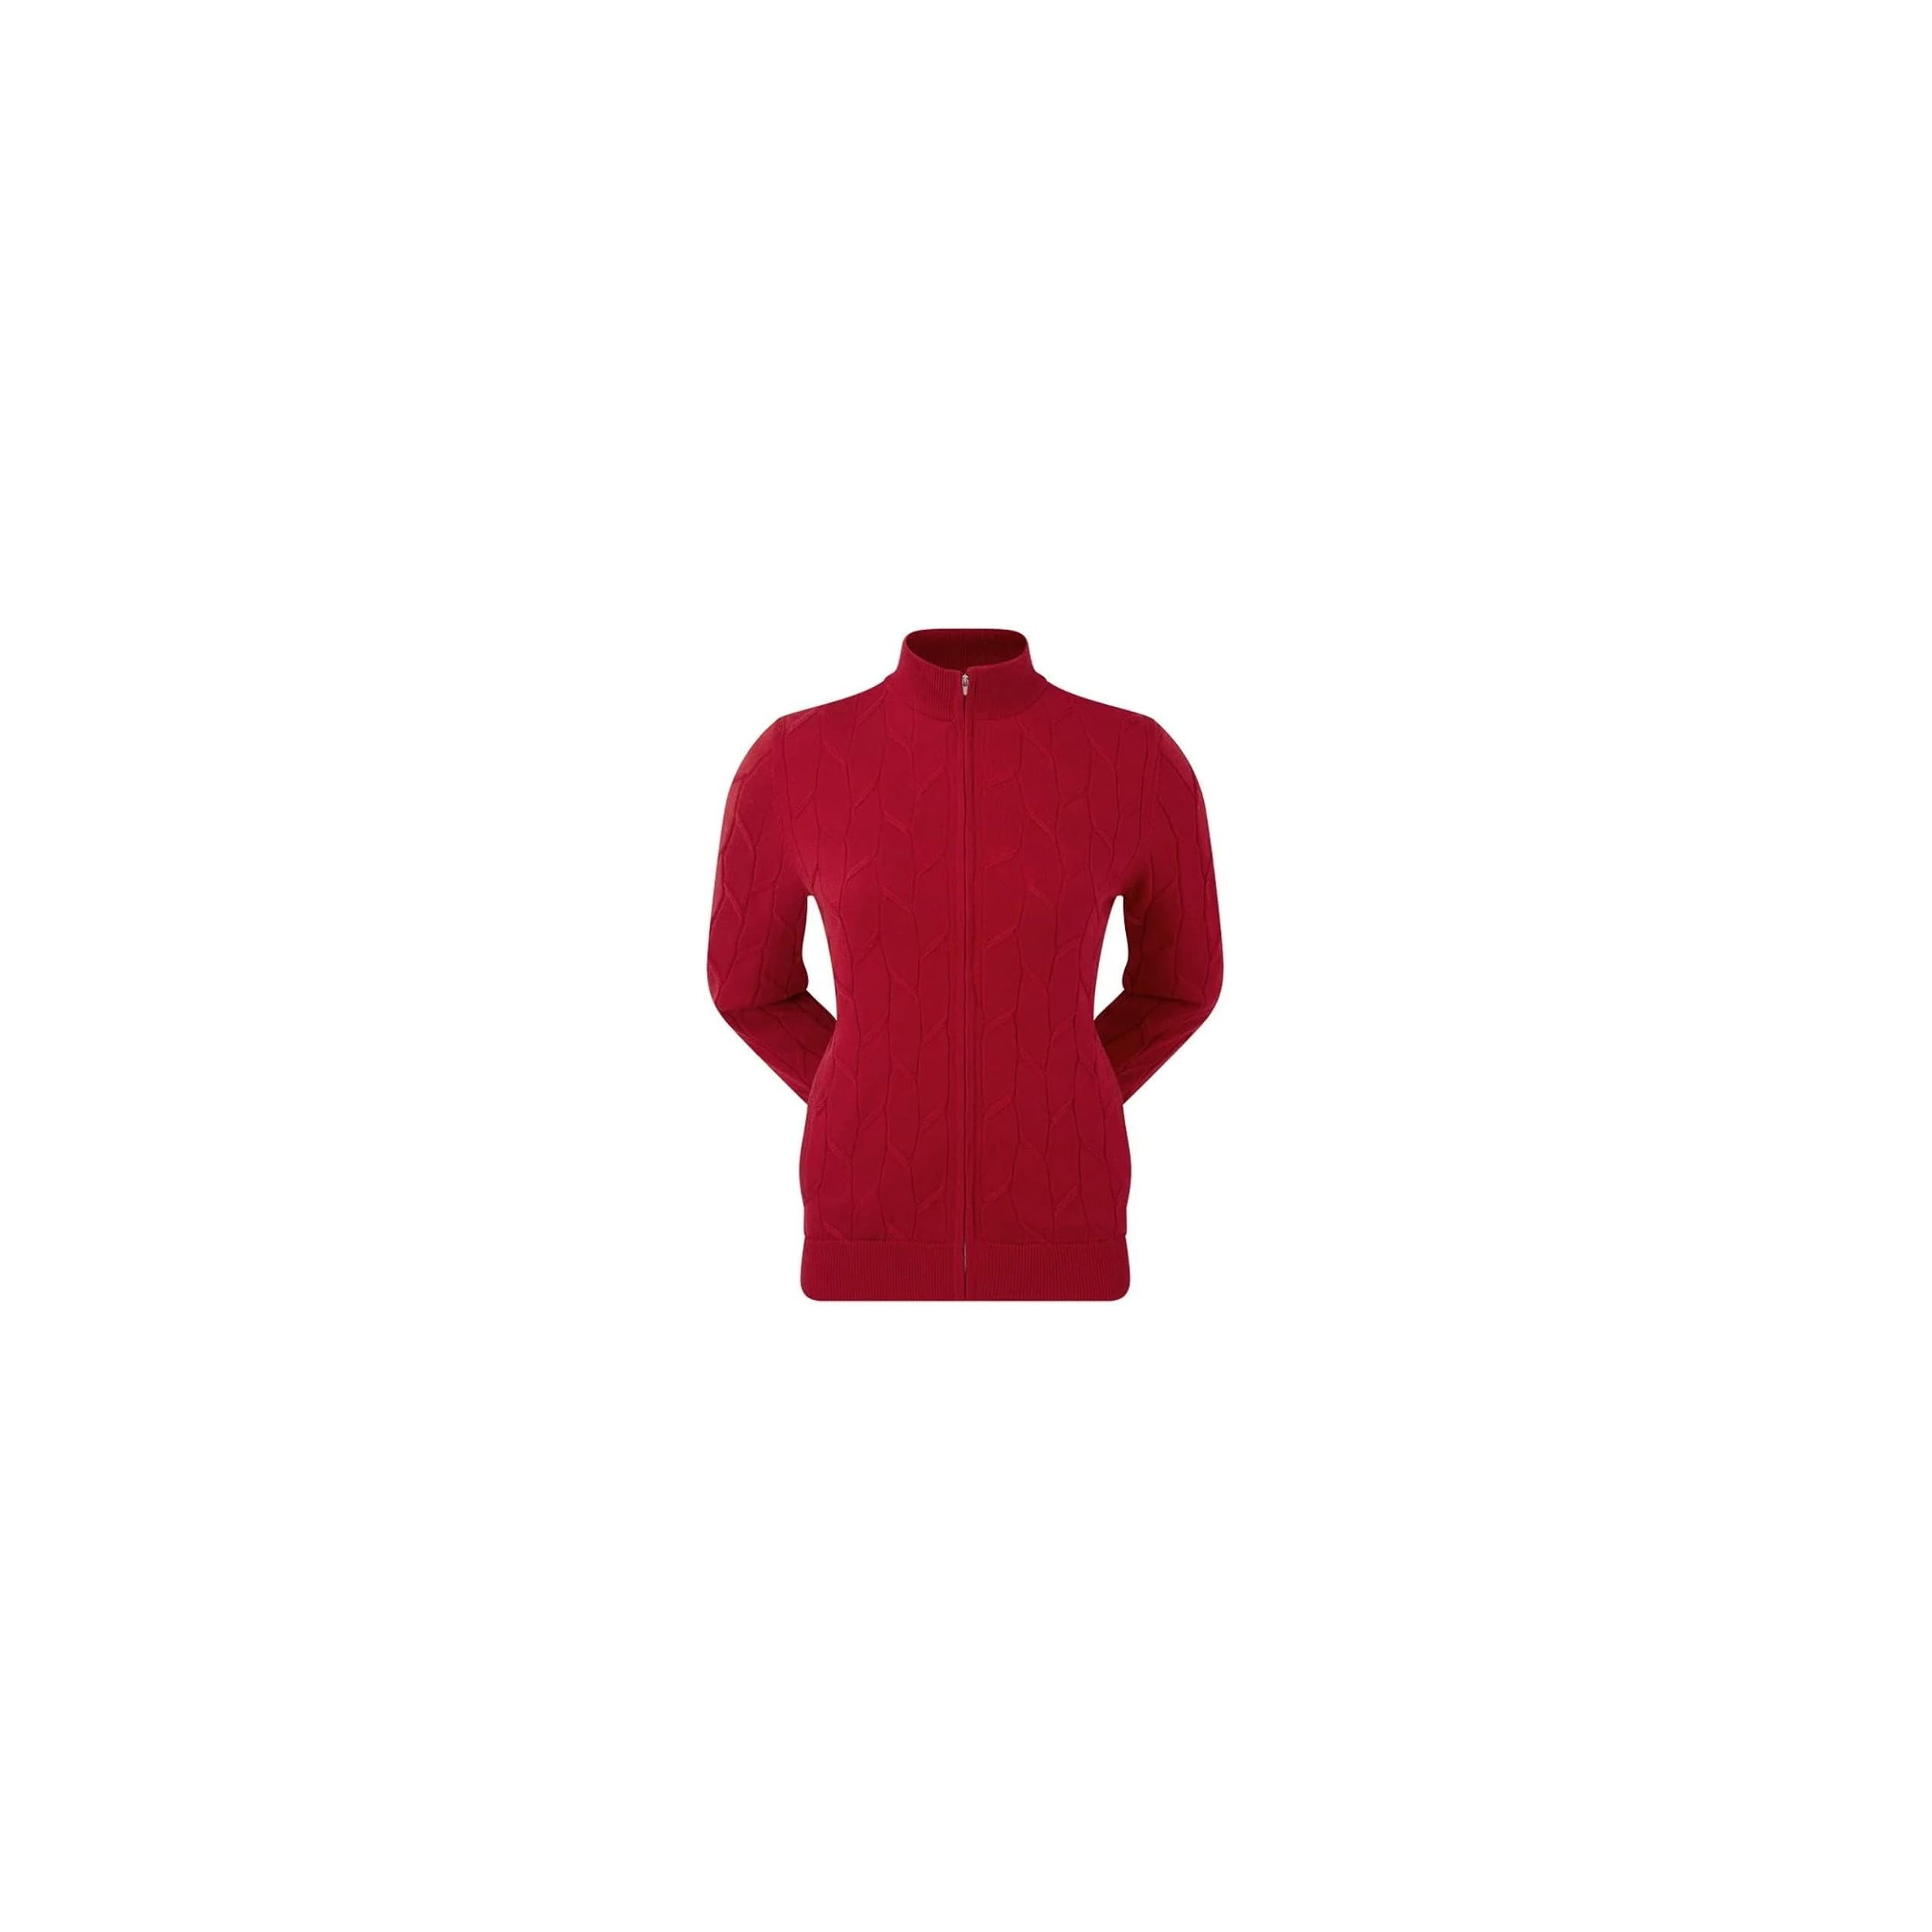 JERSEY FOOTJOY FULL-ZIP LINED LADY RED